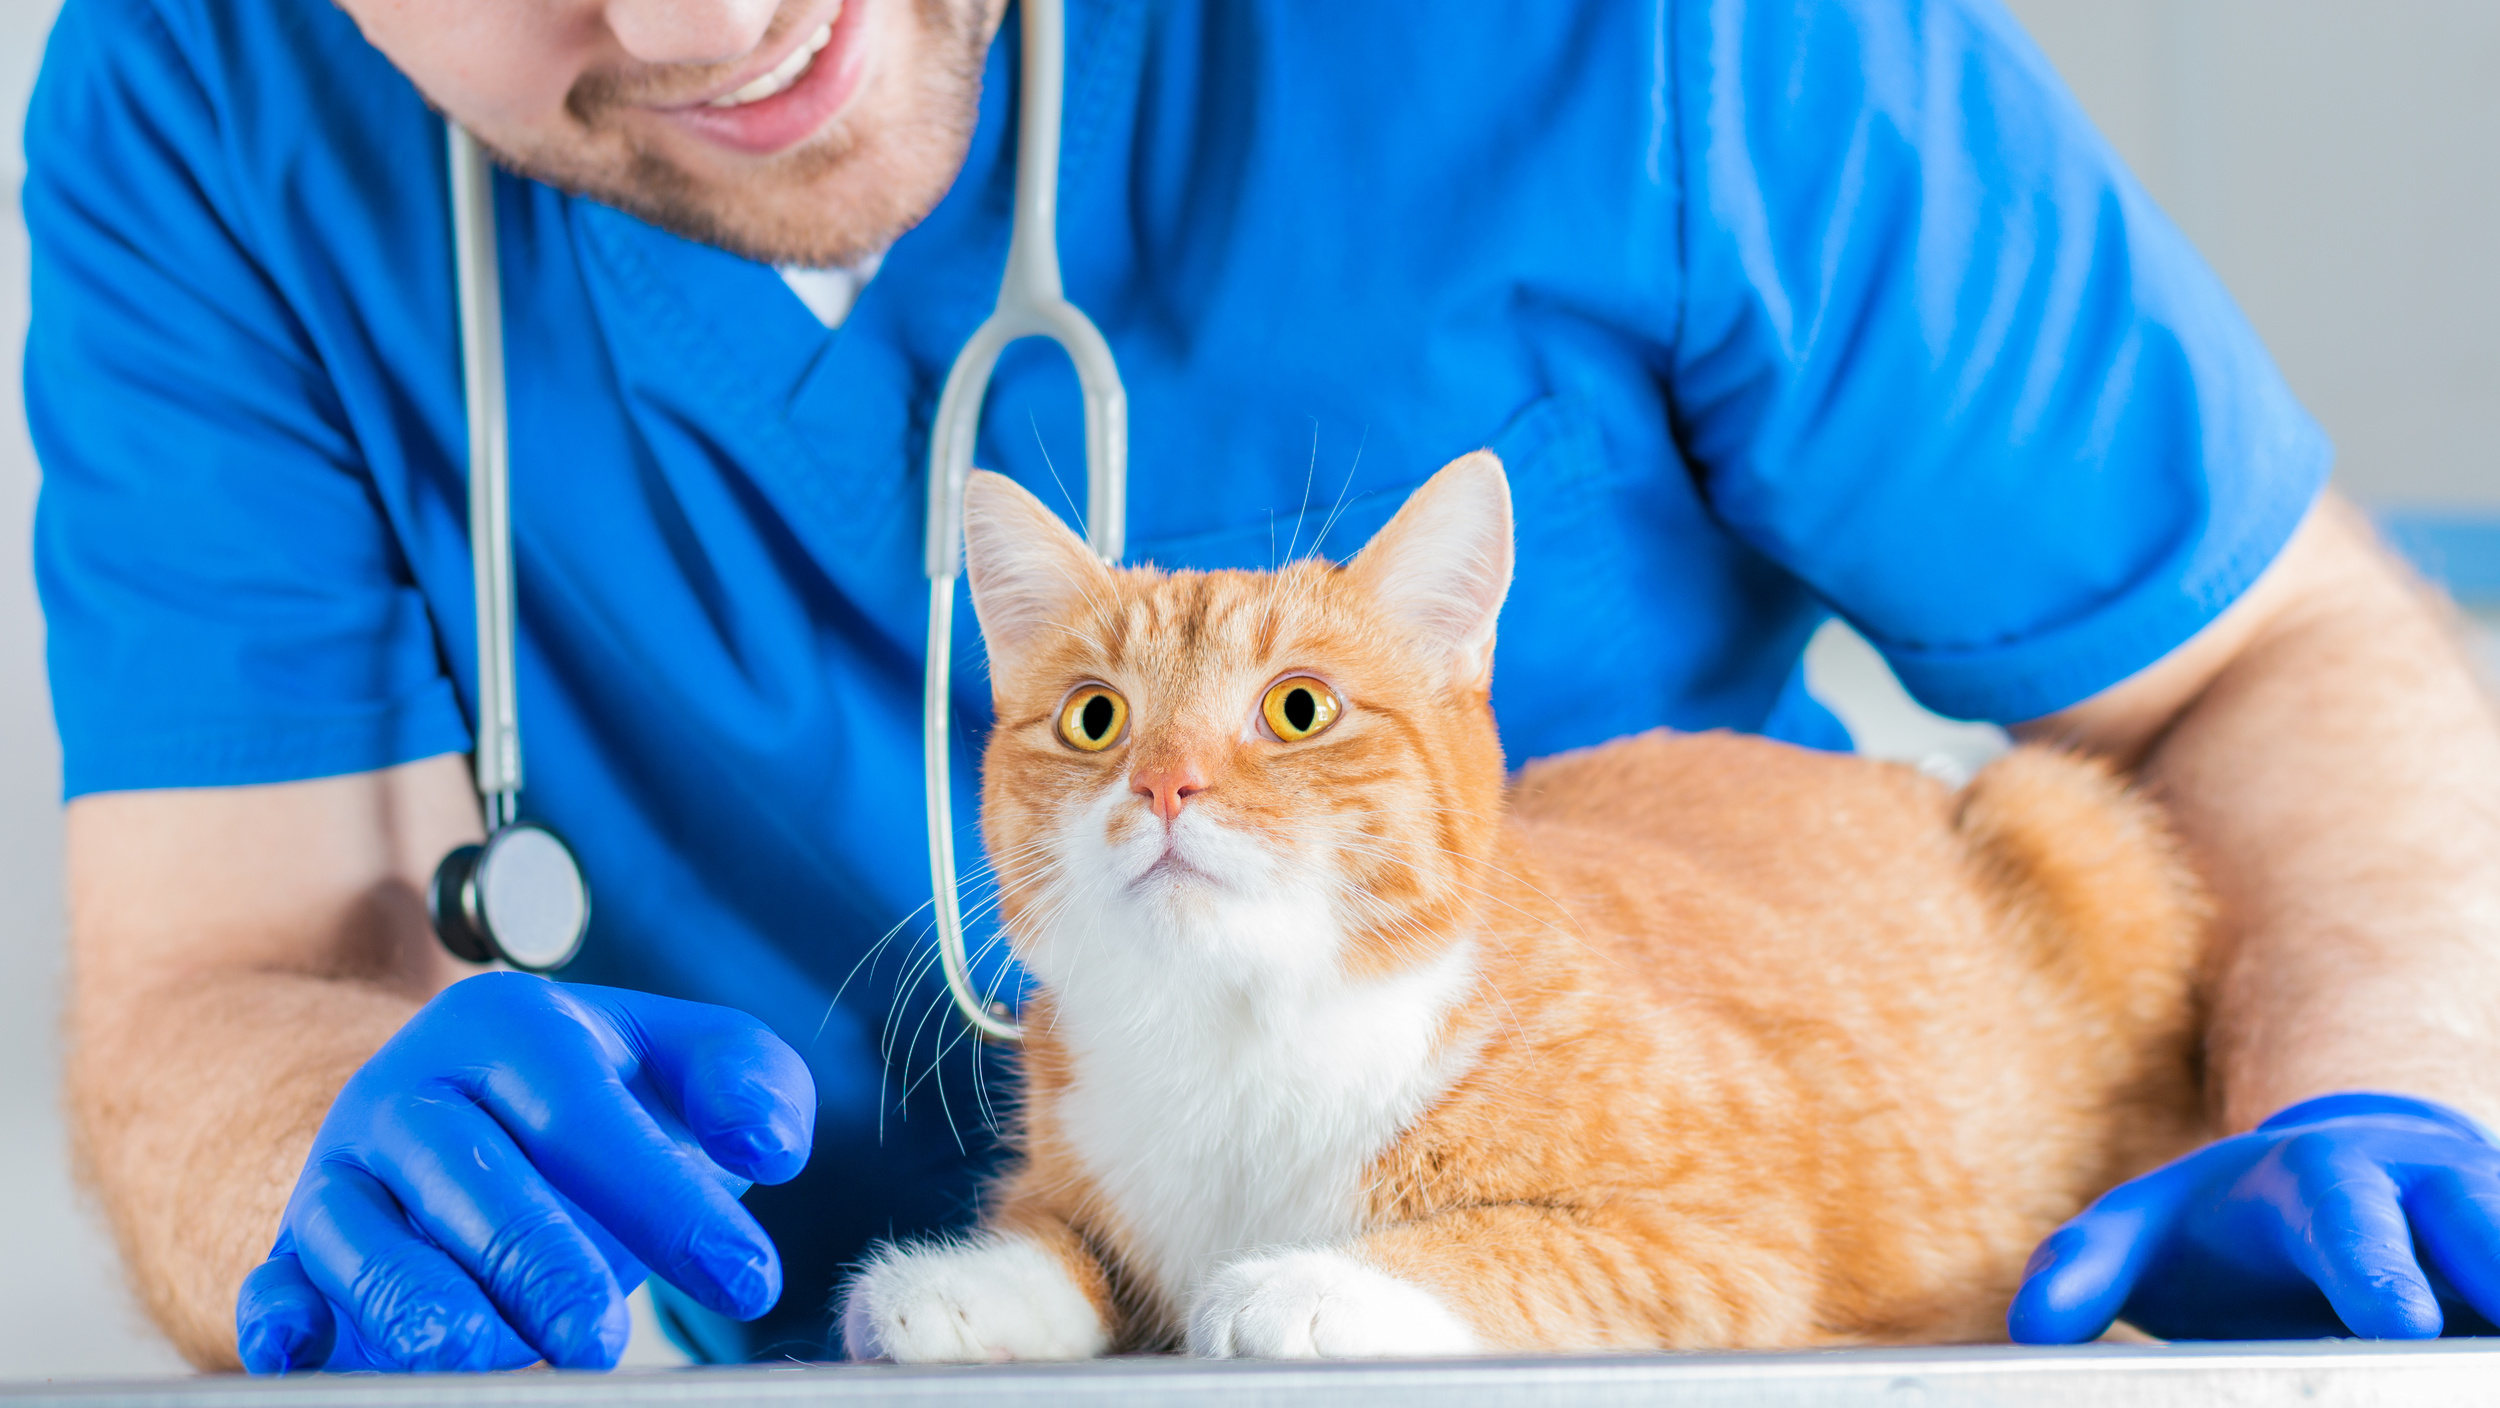 <p>Spaying and neutering housepets is a hugely important tool in the fight against homeless animals. If you don't intend to breed your dog or cat in the future, consider having them spayed or neutered to eliminate the risk of unwanted litters. </p><p>You may also like: <a href='https://www.yardbarker.com/lifestyle/articles/20_delicious_twists_on_classic_lasagna_082323/s1__24411058'>20 delicious twists on classic lasagna</a></p>